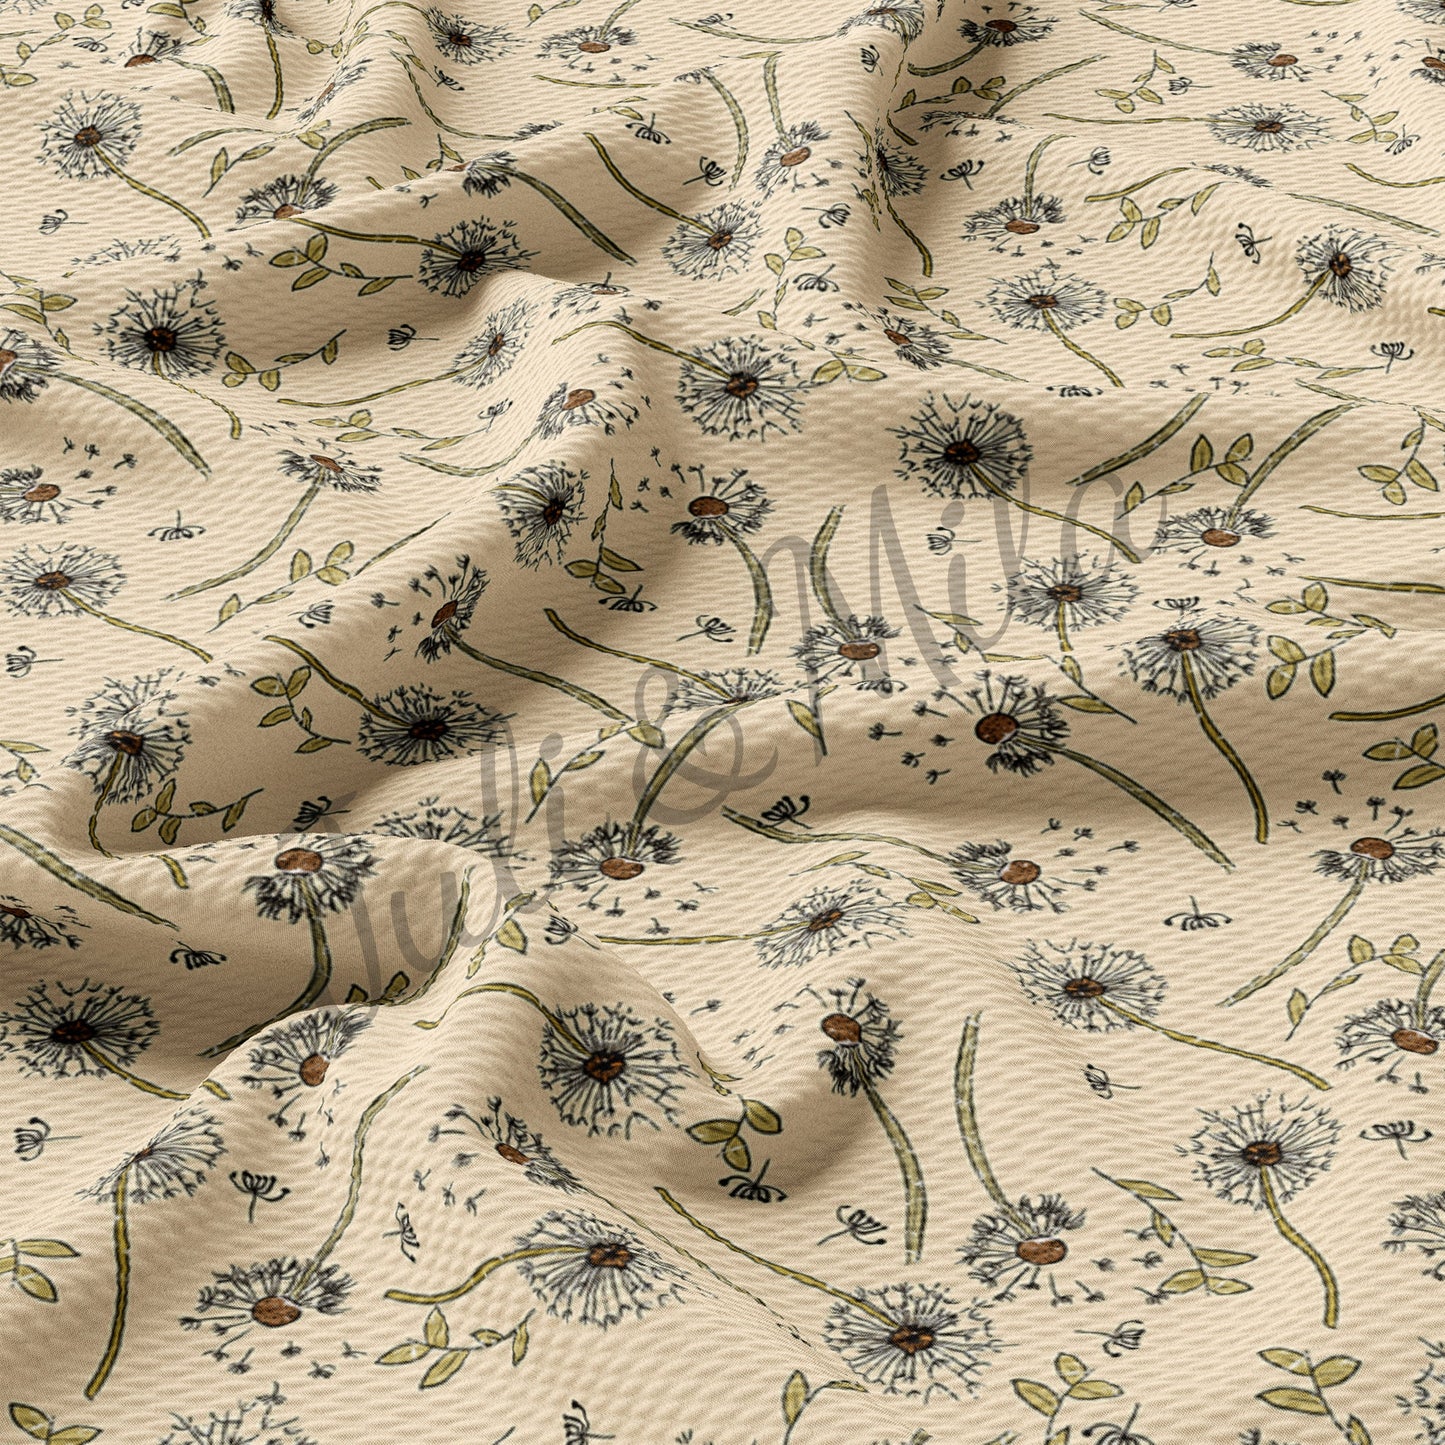 Bullet Textured Fabric  (Floral51)